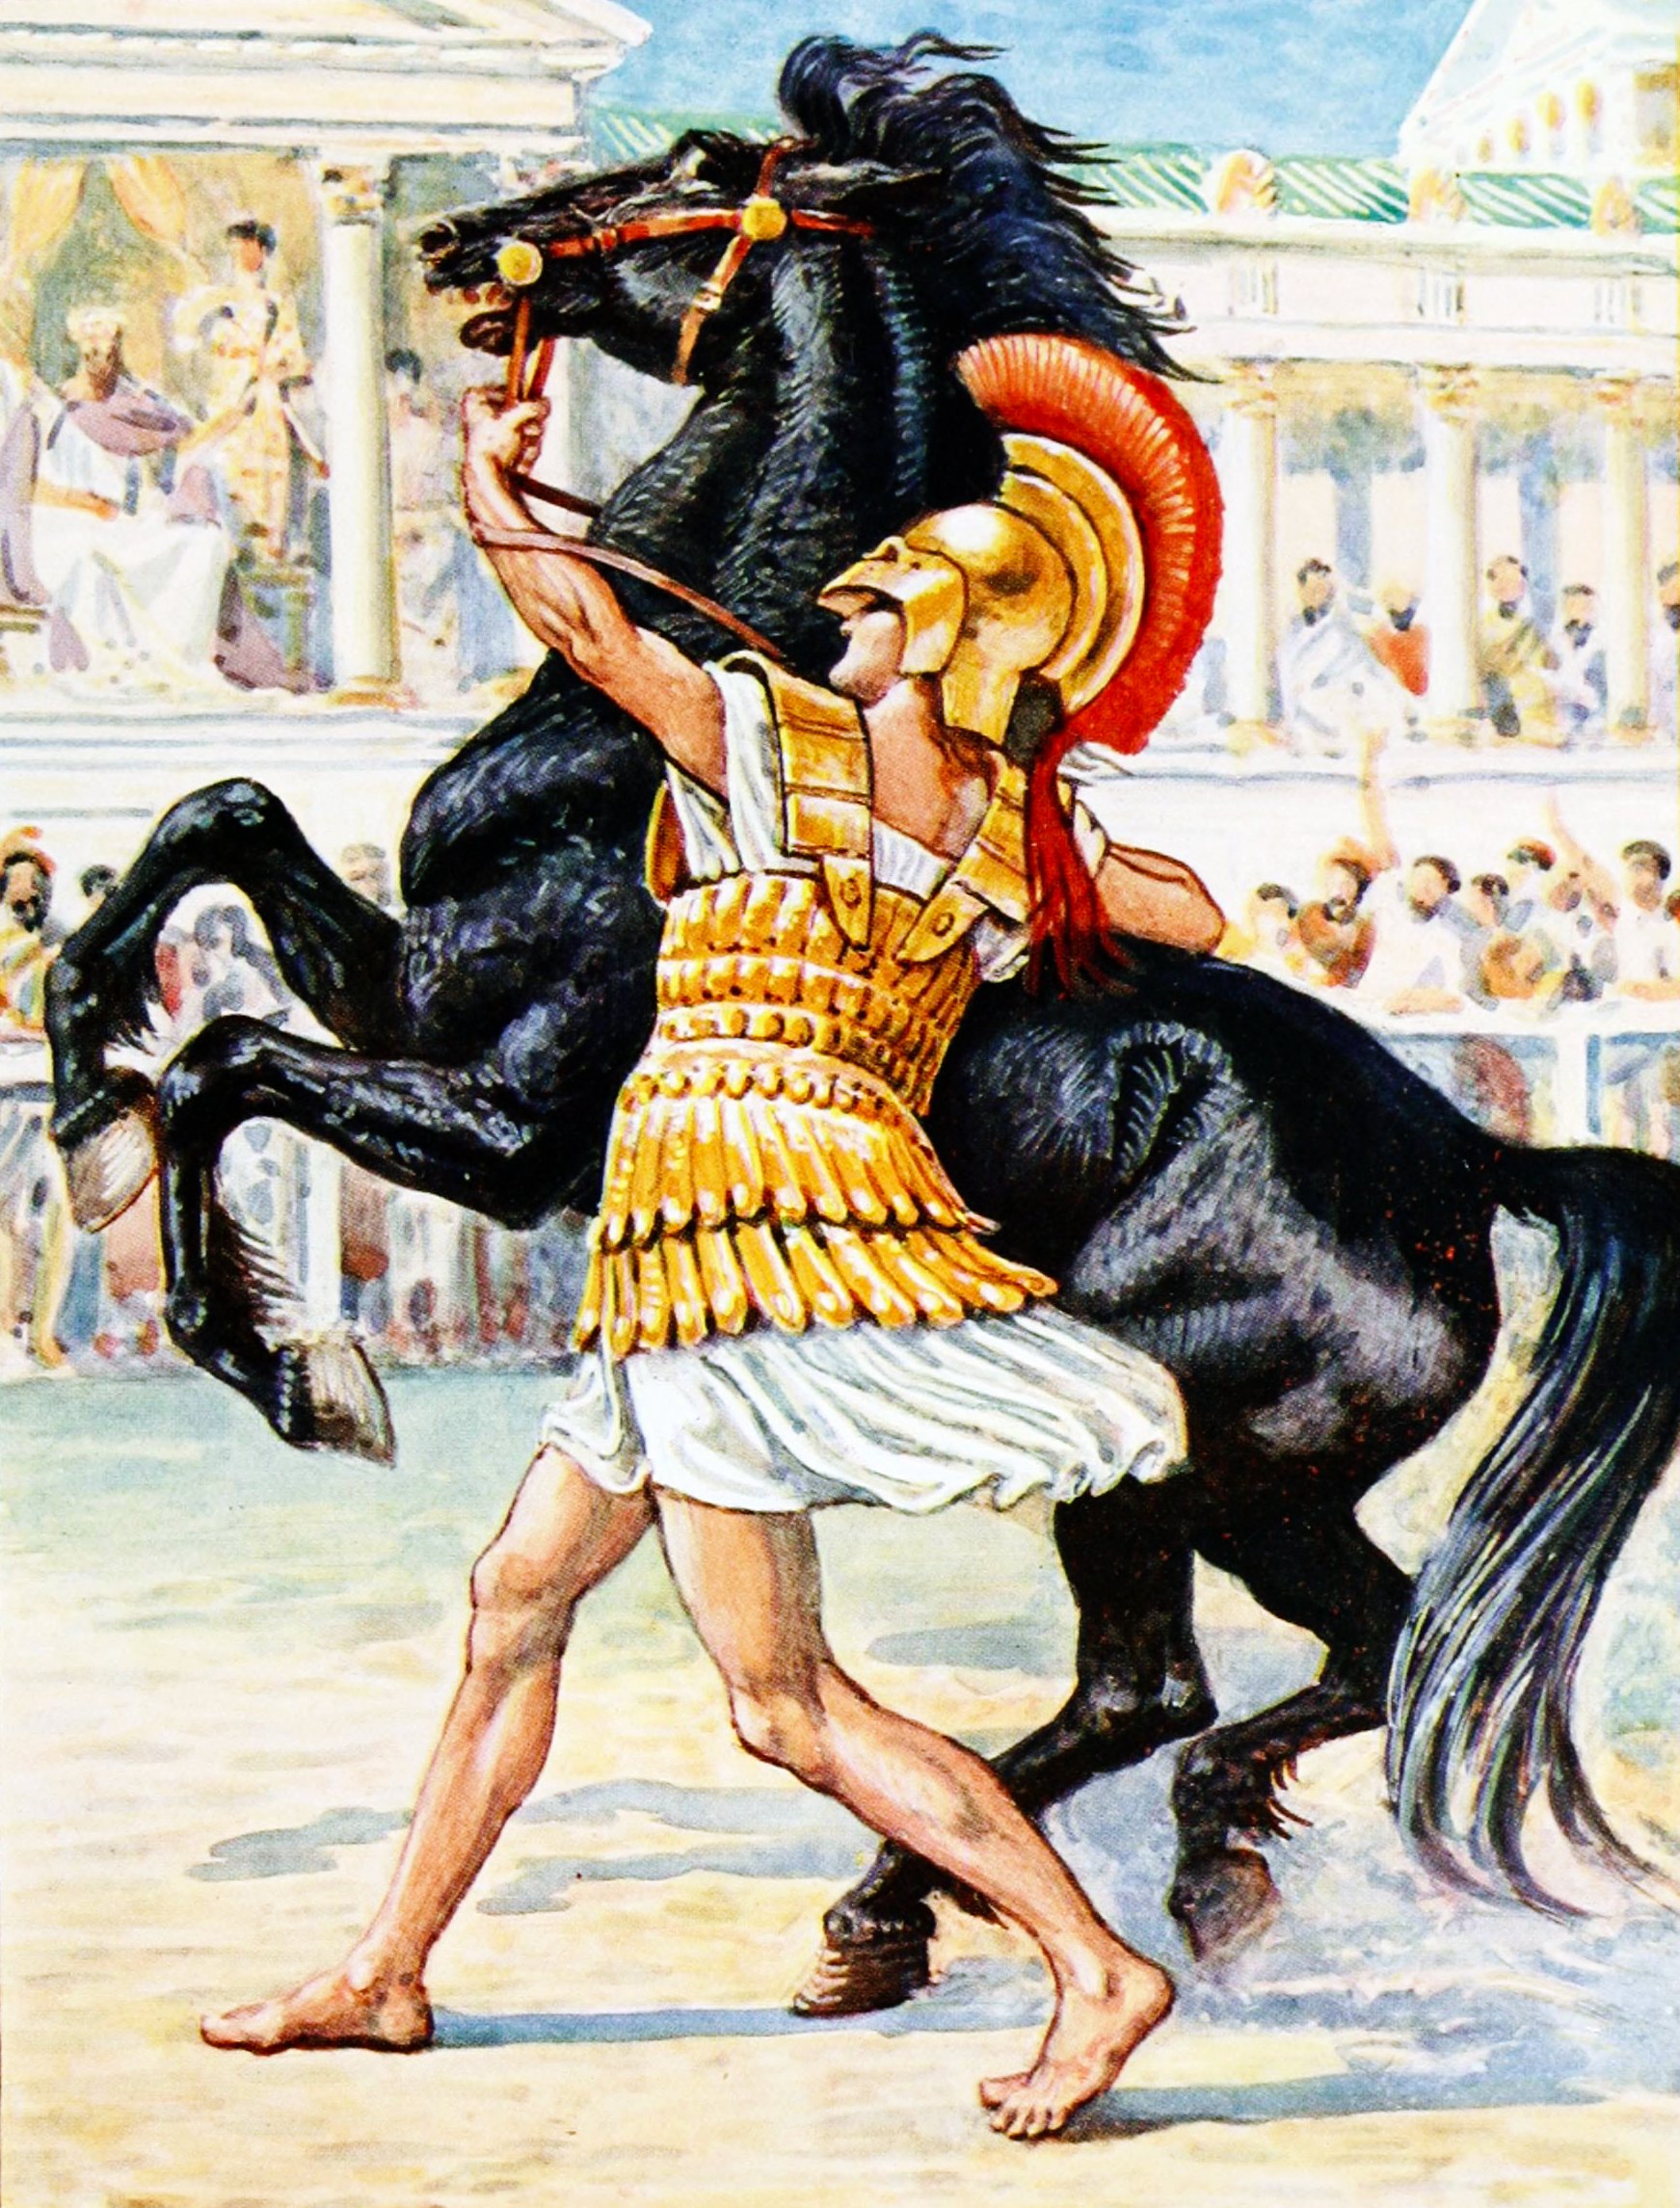 Vibrant illustration of Alexander the Great, adorned in golden armor and a red plume helmet, as he confidently tames a rearing black horse, Bucephalus, amidst a backdrop of ancient buildings and an attentive crowd.